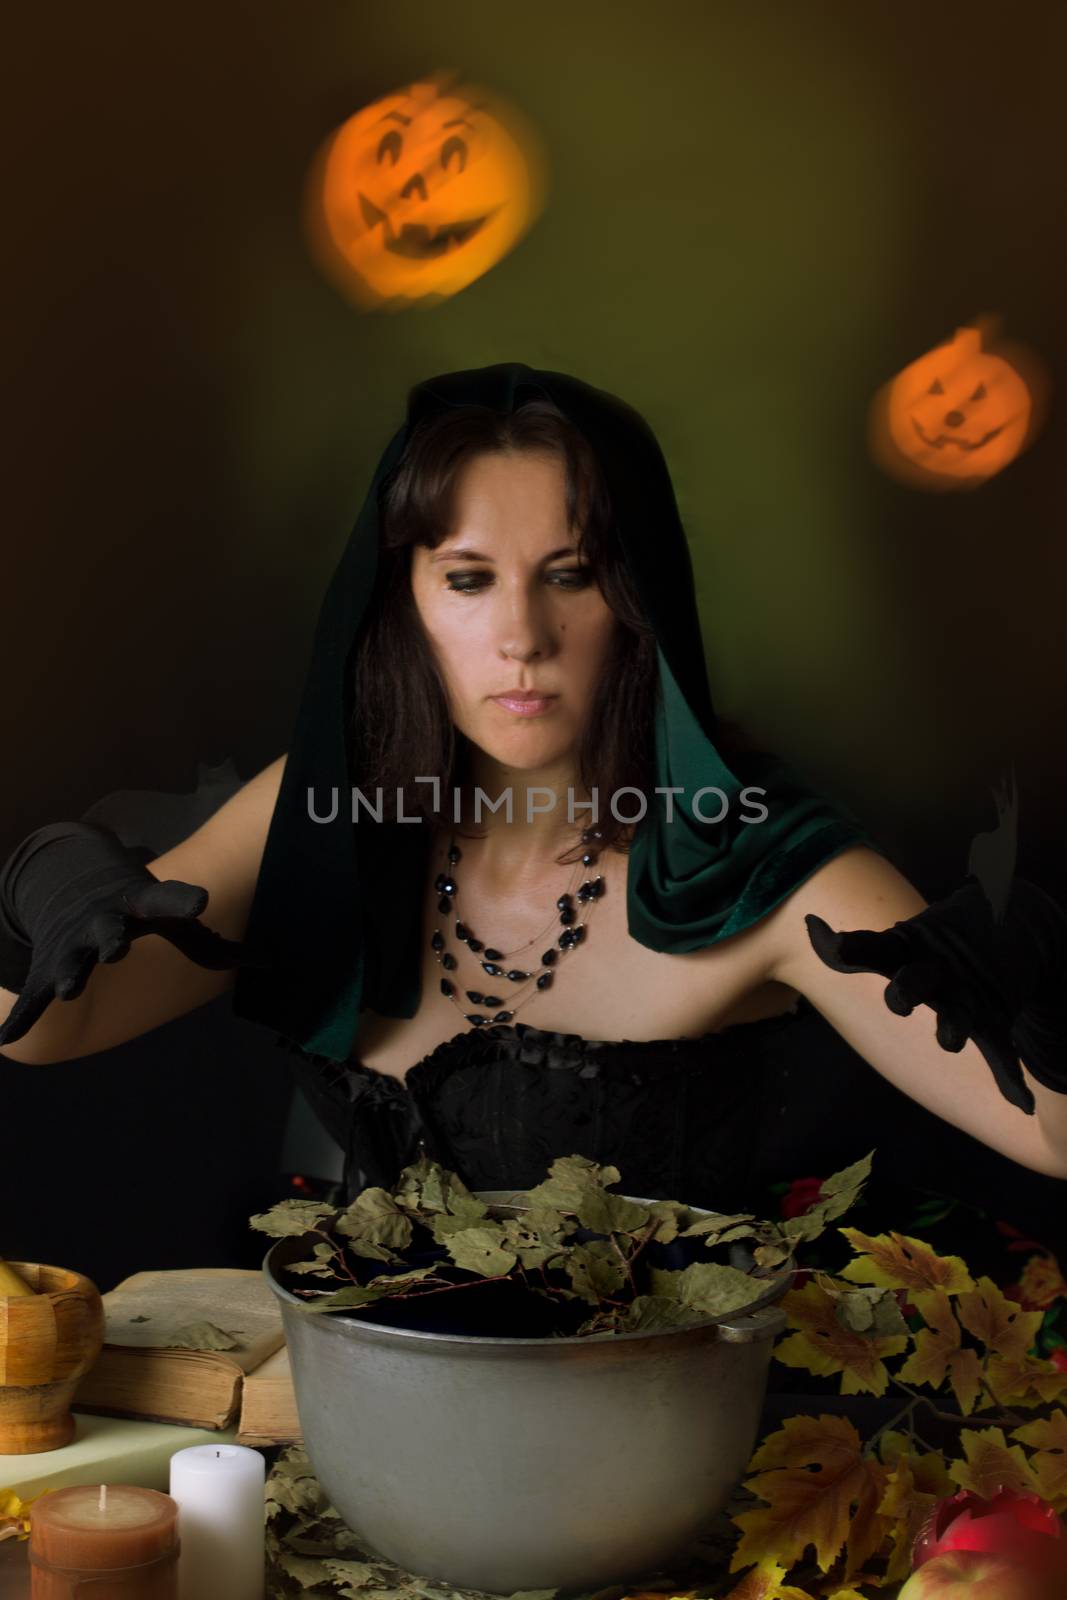 Witch practising sorcery at Halloween by Angel_a